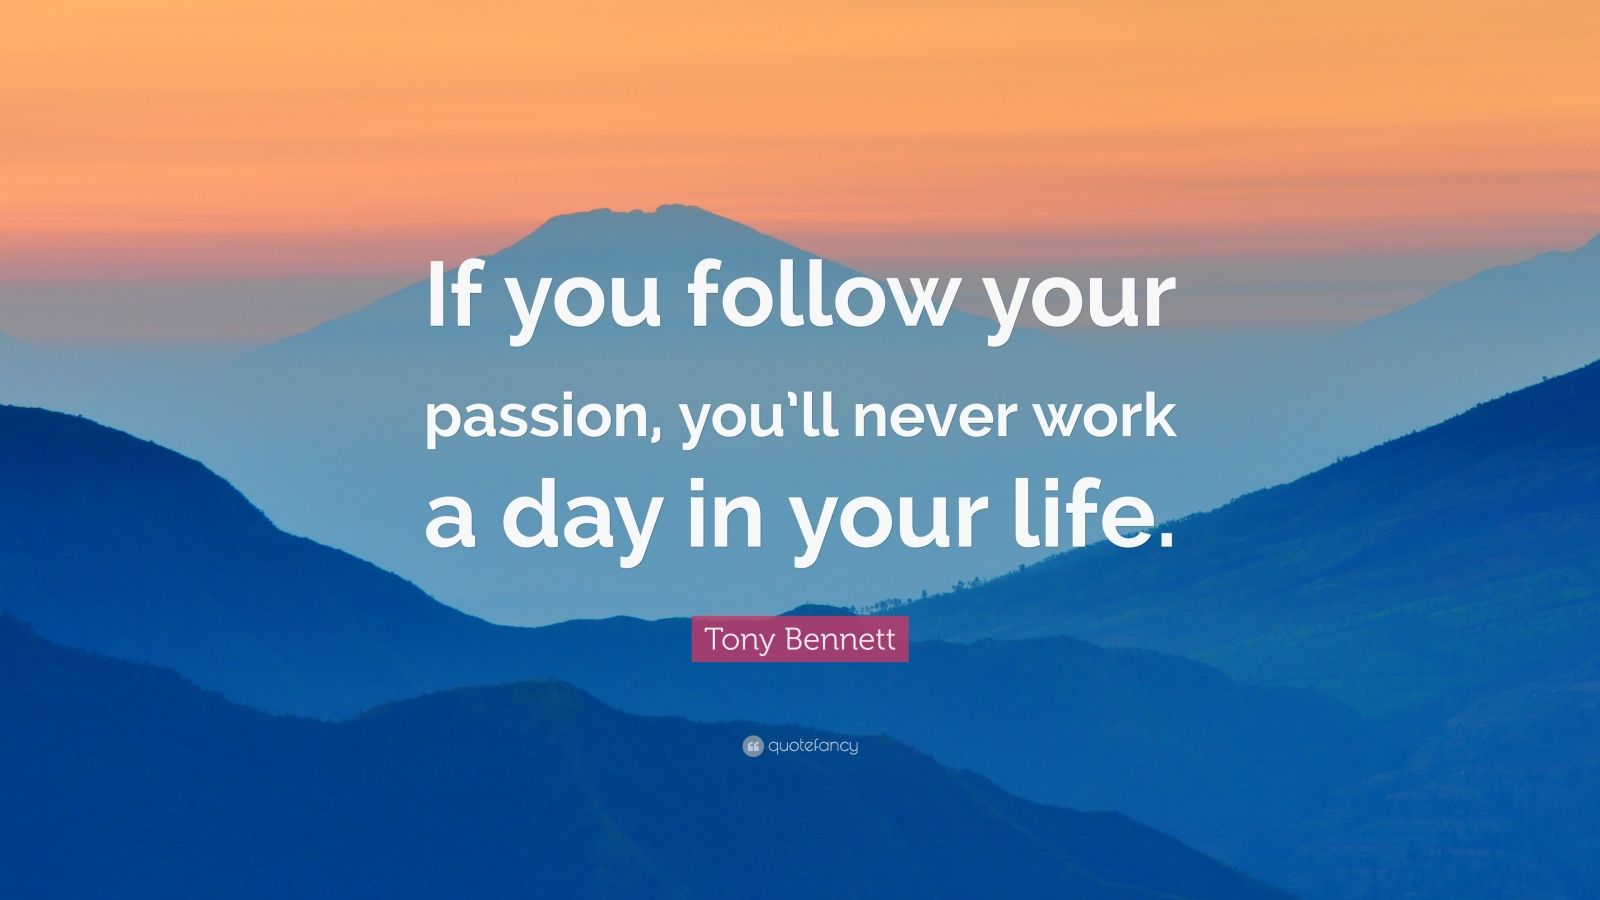 Tony Bennett Quote “if You Follow Your Passion Youll Never Work A Day In Your Life” 12